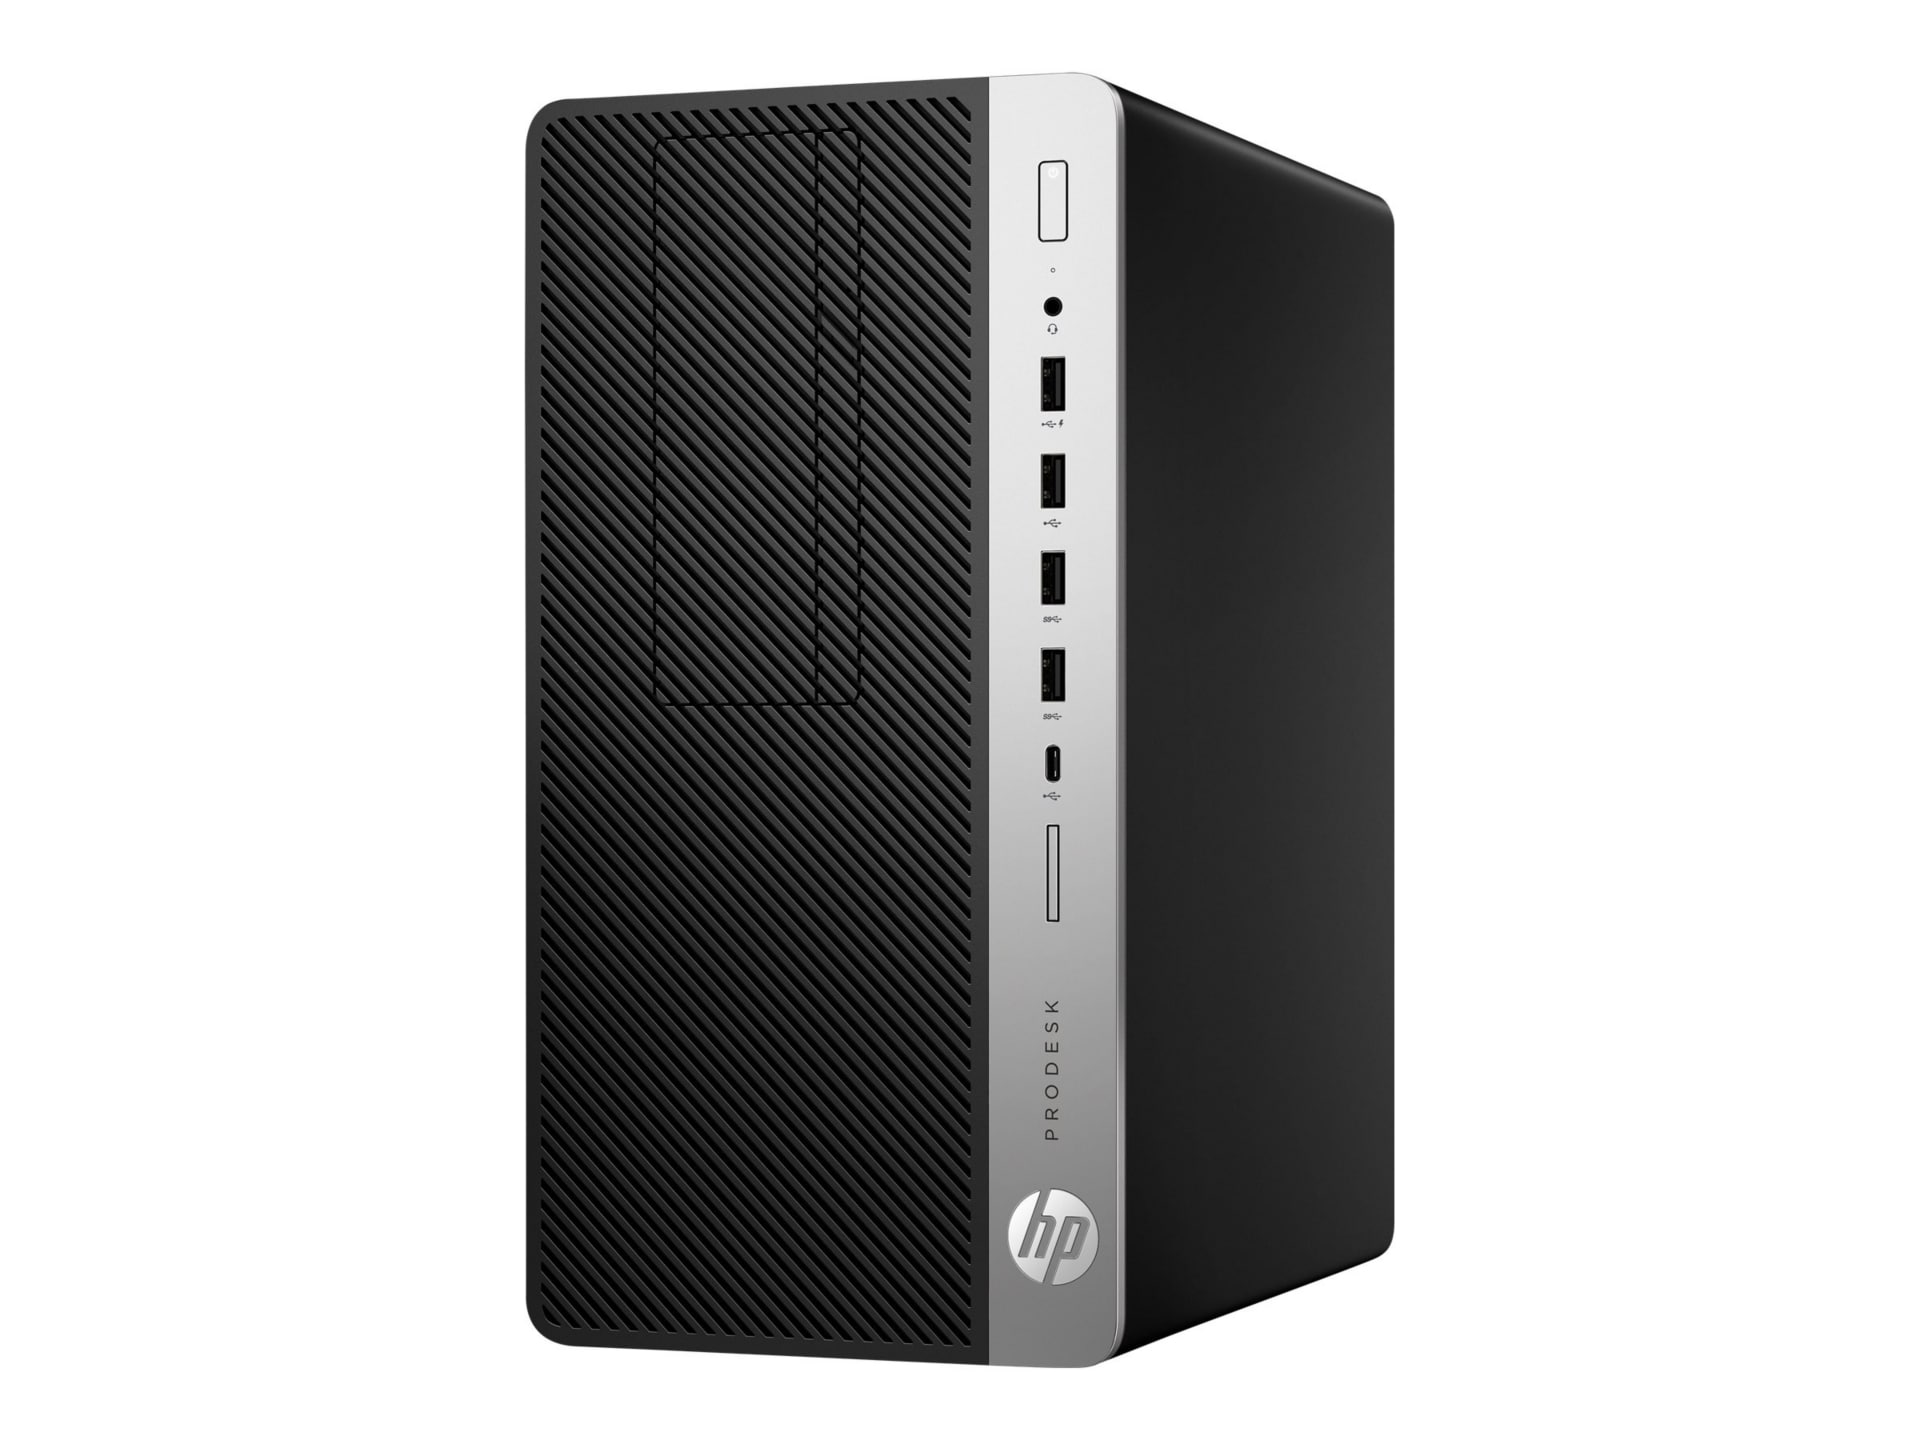 HP ProDesk 600 G3 - micro tower - Core i3 7100 3.9 GHz - 4 GB - HDD 500 GB - Canadian French